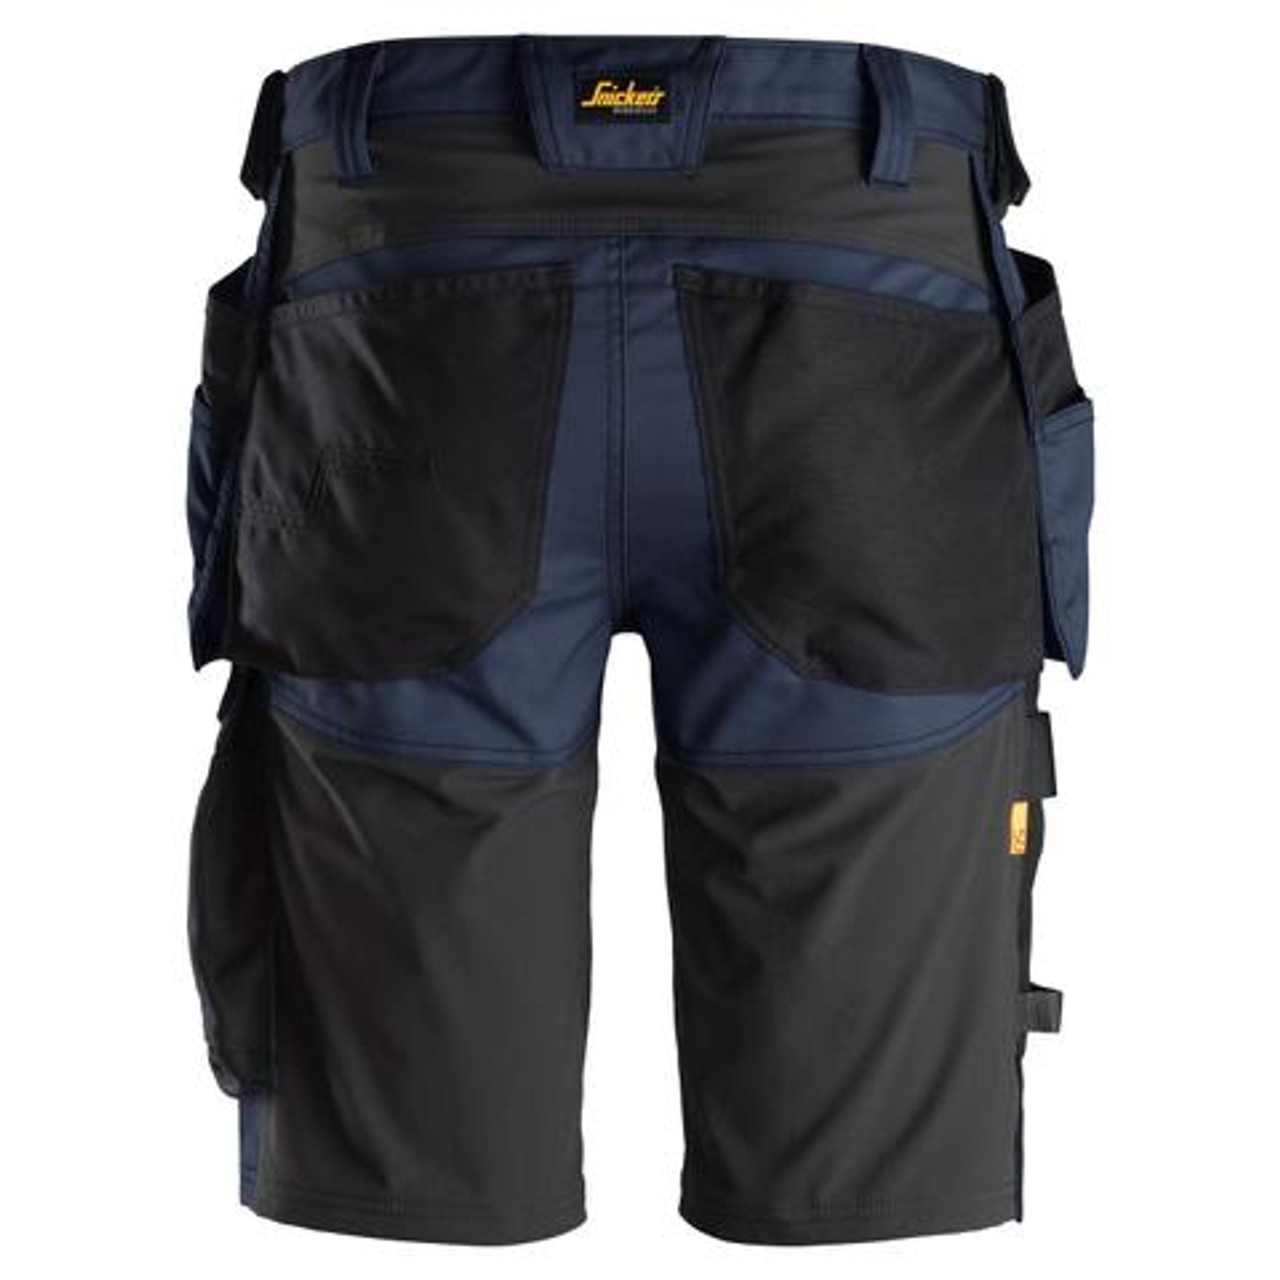 SNICKERS Cotton with Stretch Navy Blue Shorts for Carpenters that have Holster Pockets  available in Australia and New Zealand